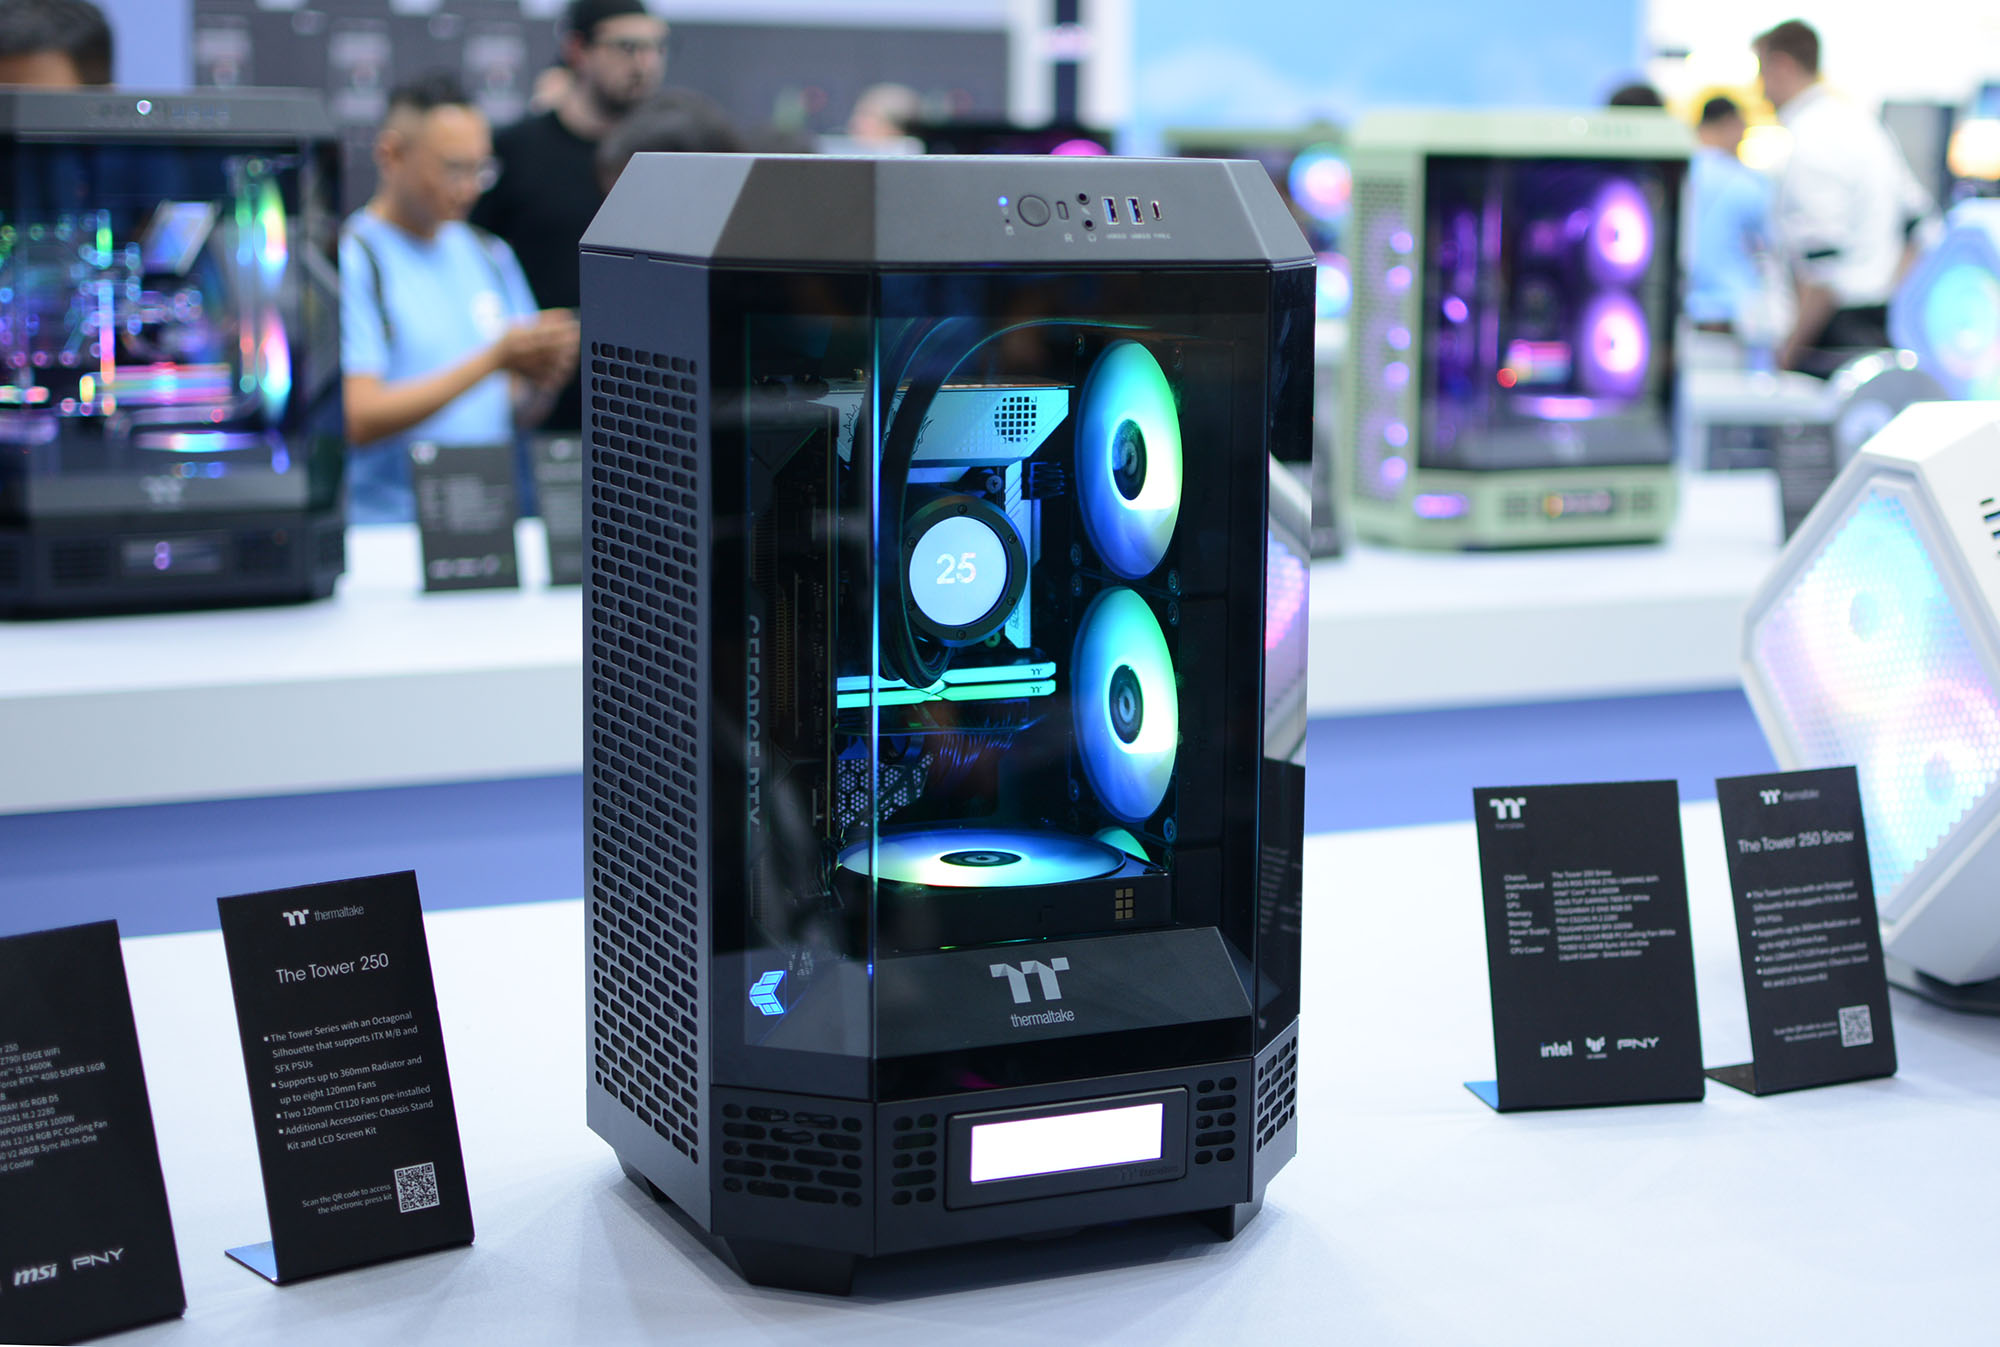 The Thermaltake Tower 250 PC case showcased at Computex 2024.